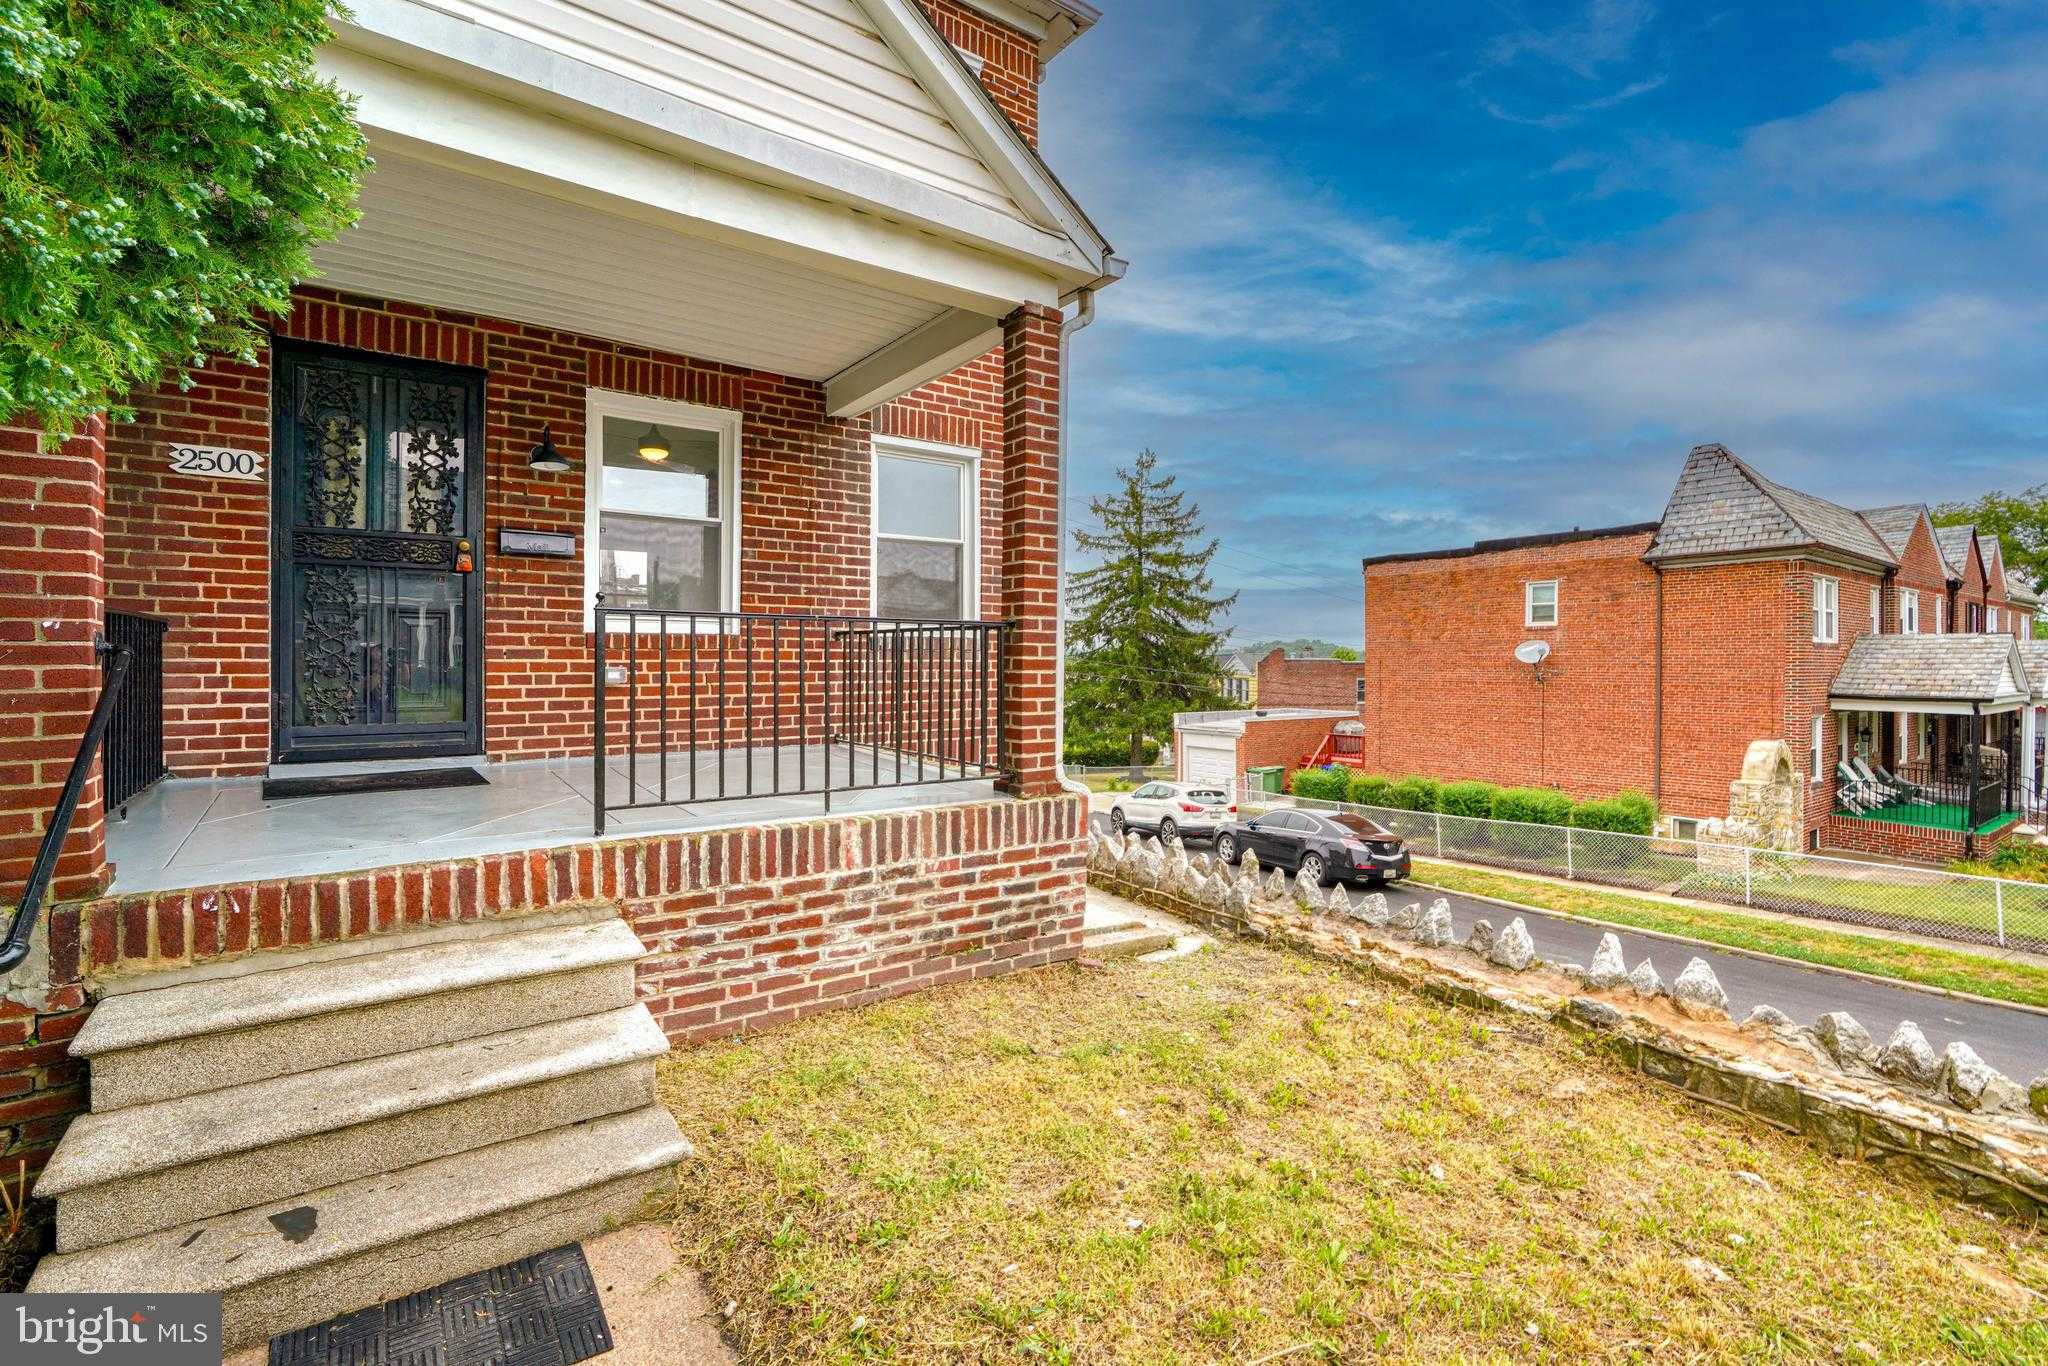 View BALTIMORE, MD 21215 townhome